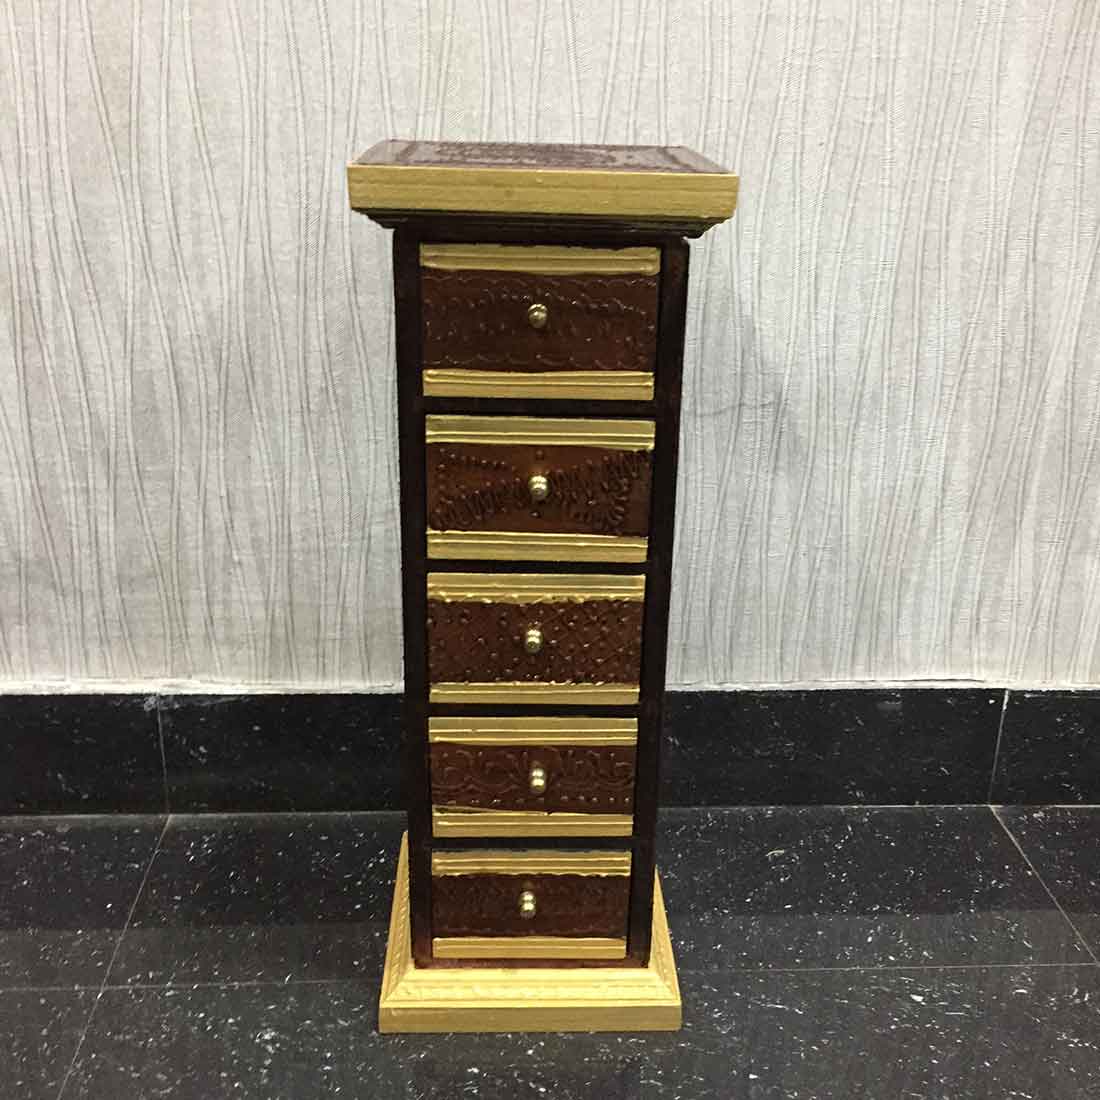 Jewelry Box Wooden | Decorative Jewellery Box - 5 Drawers - For Organizing & Gifts - 18 Inch - ApkaMart